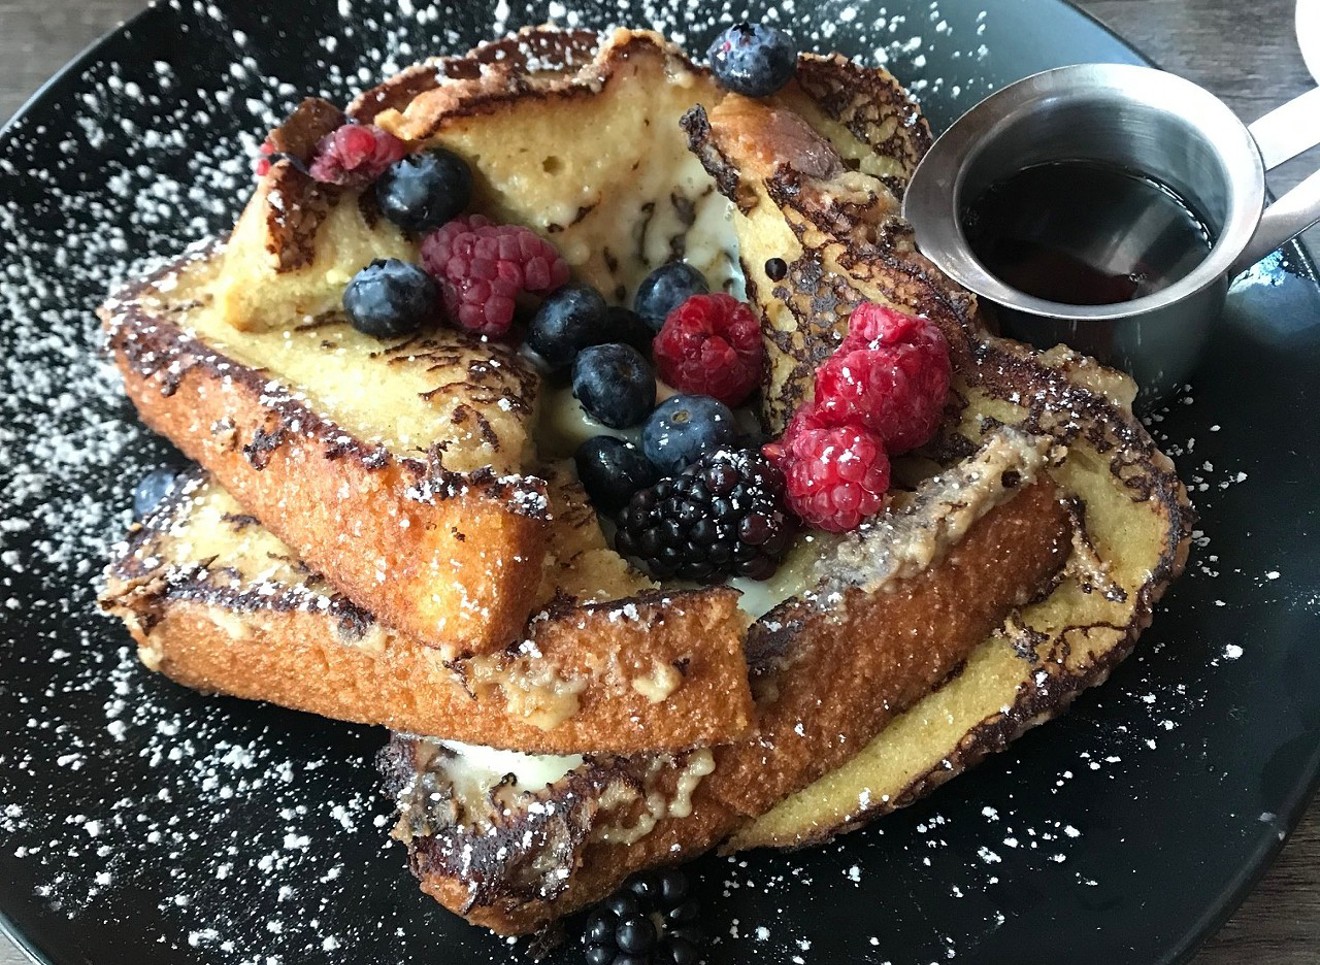 Mascarpone French toast topped with fresh berries and powdered sugar at OAK on Camelback.